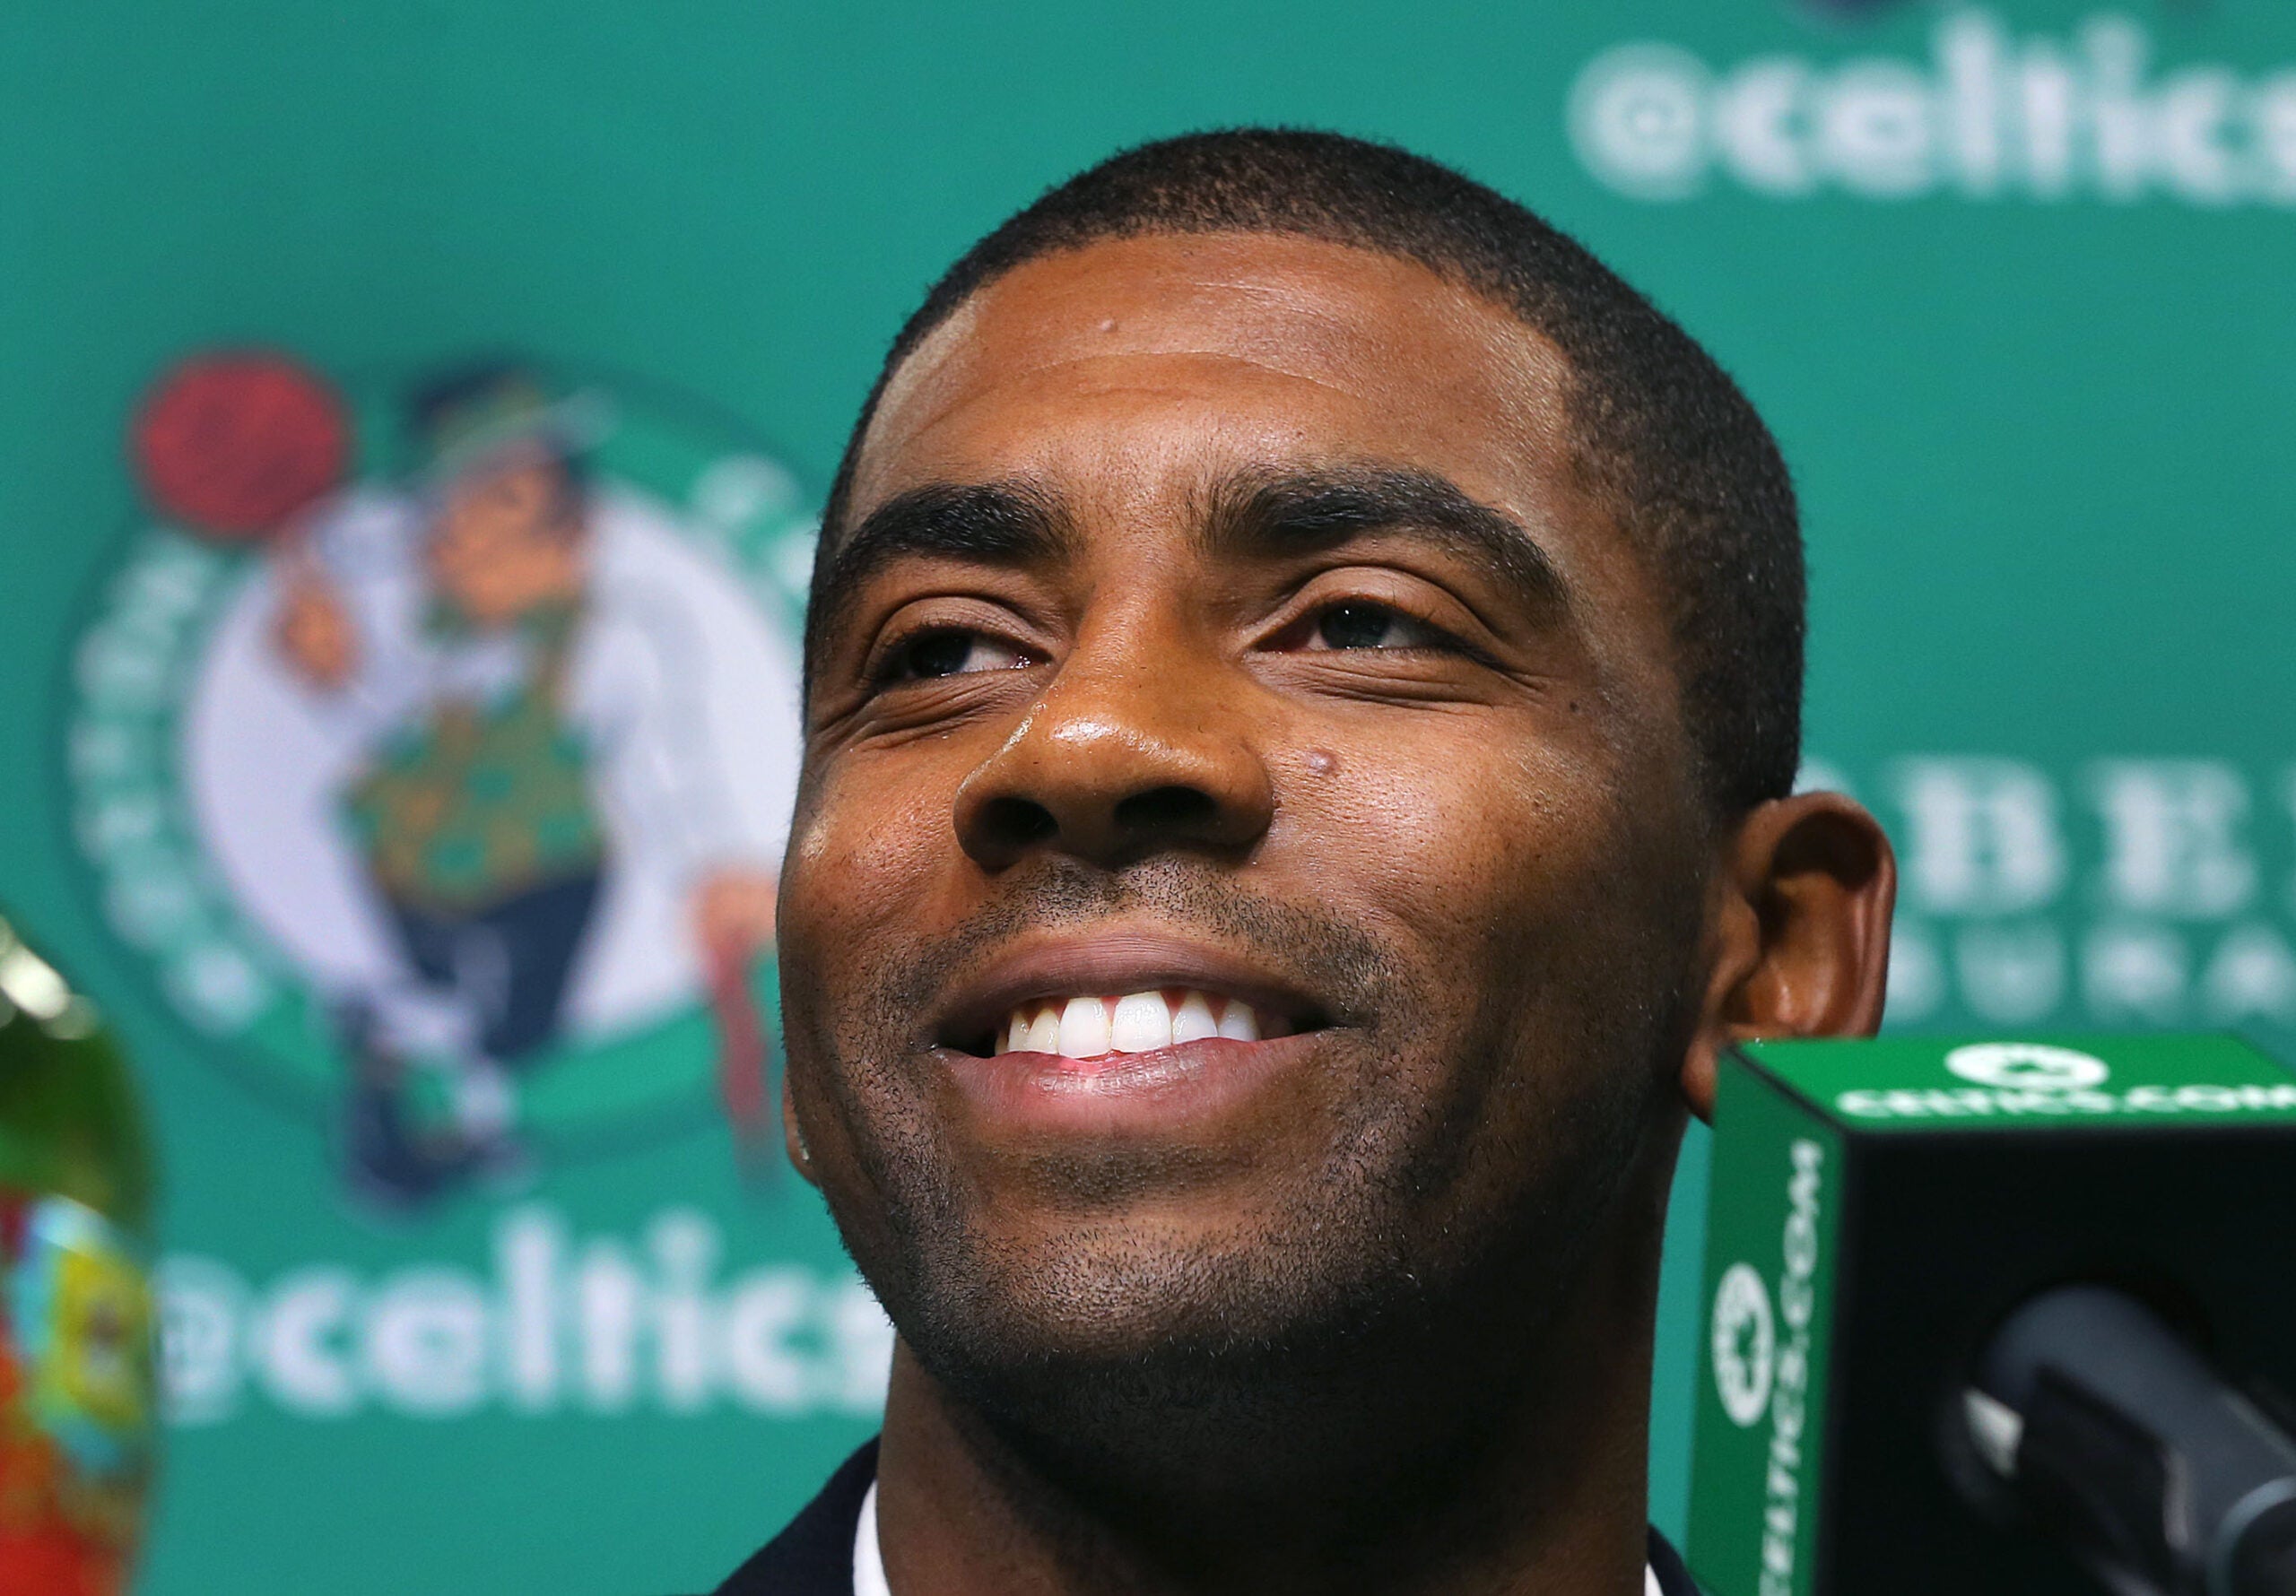 Former Cavs guard Kyrie Irving tells ESPN he doesn't care if